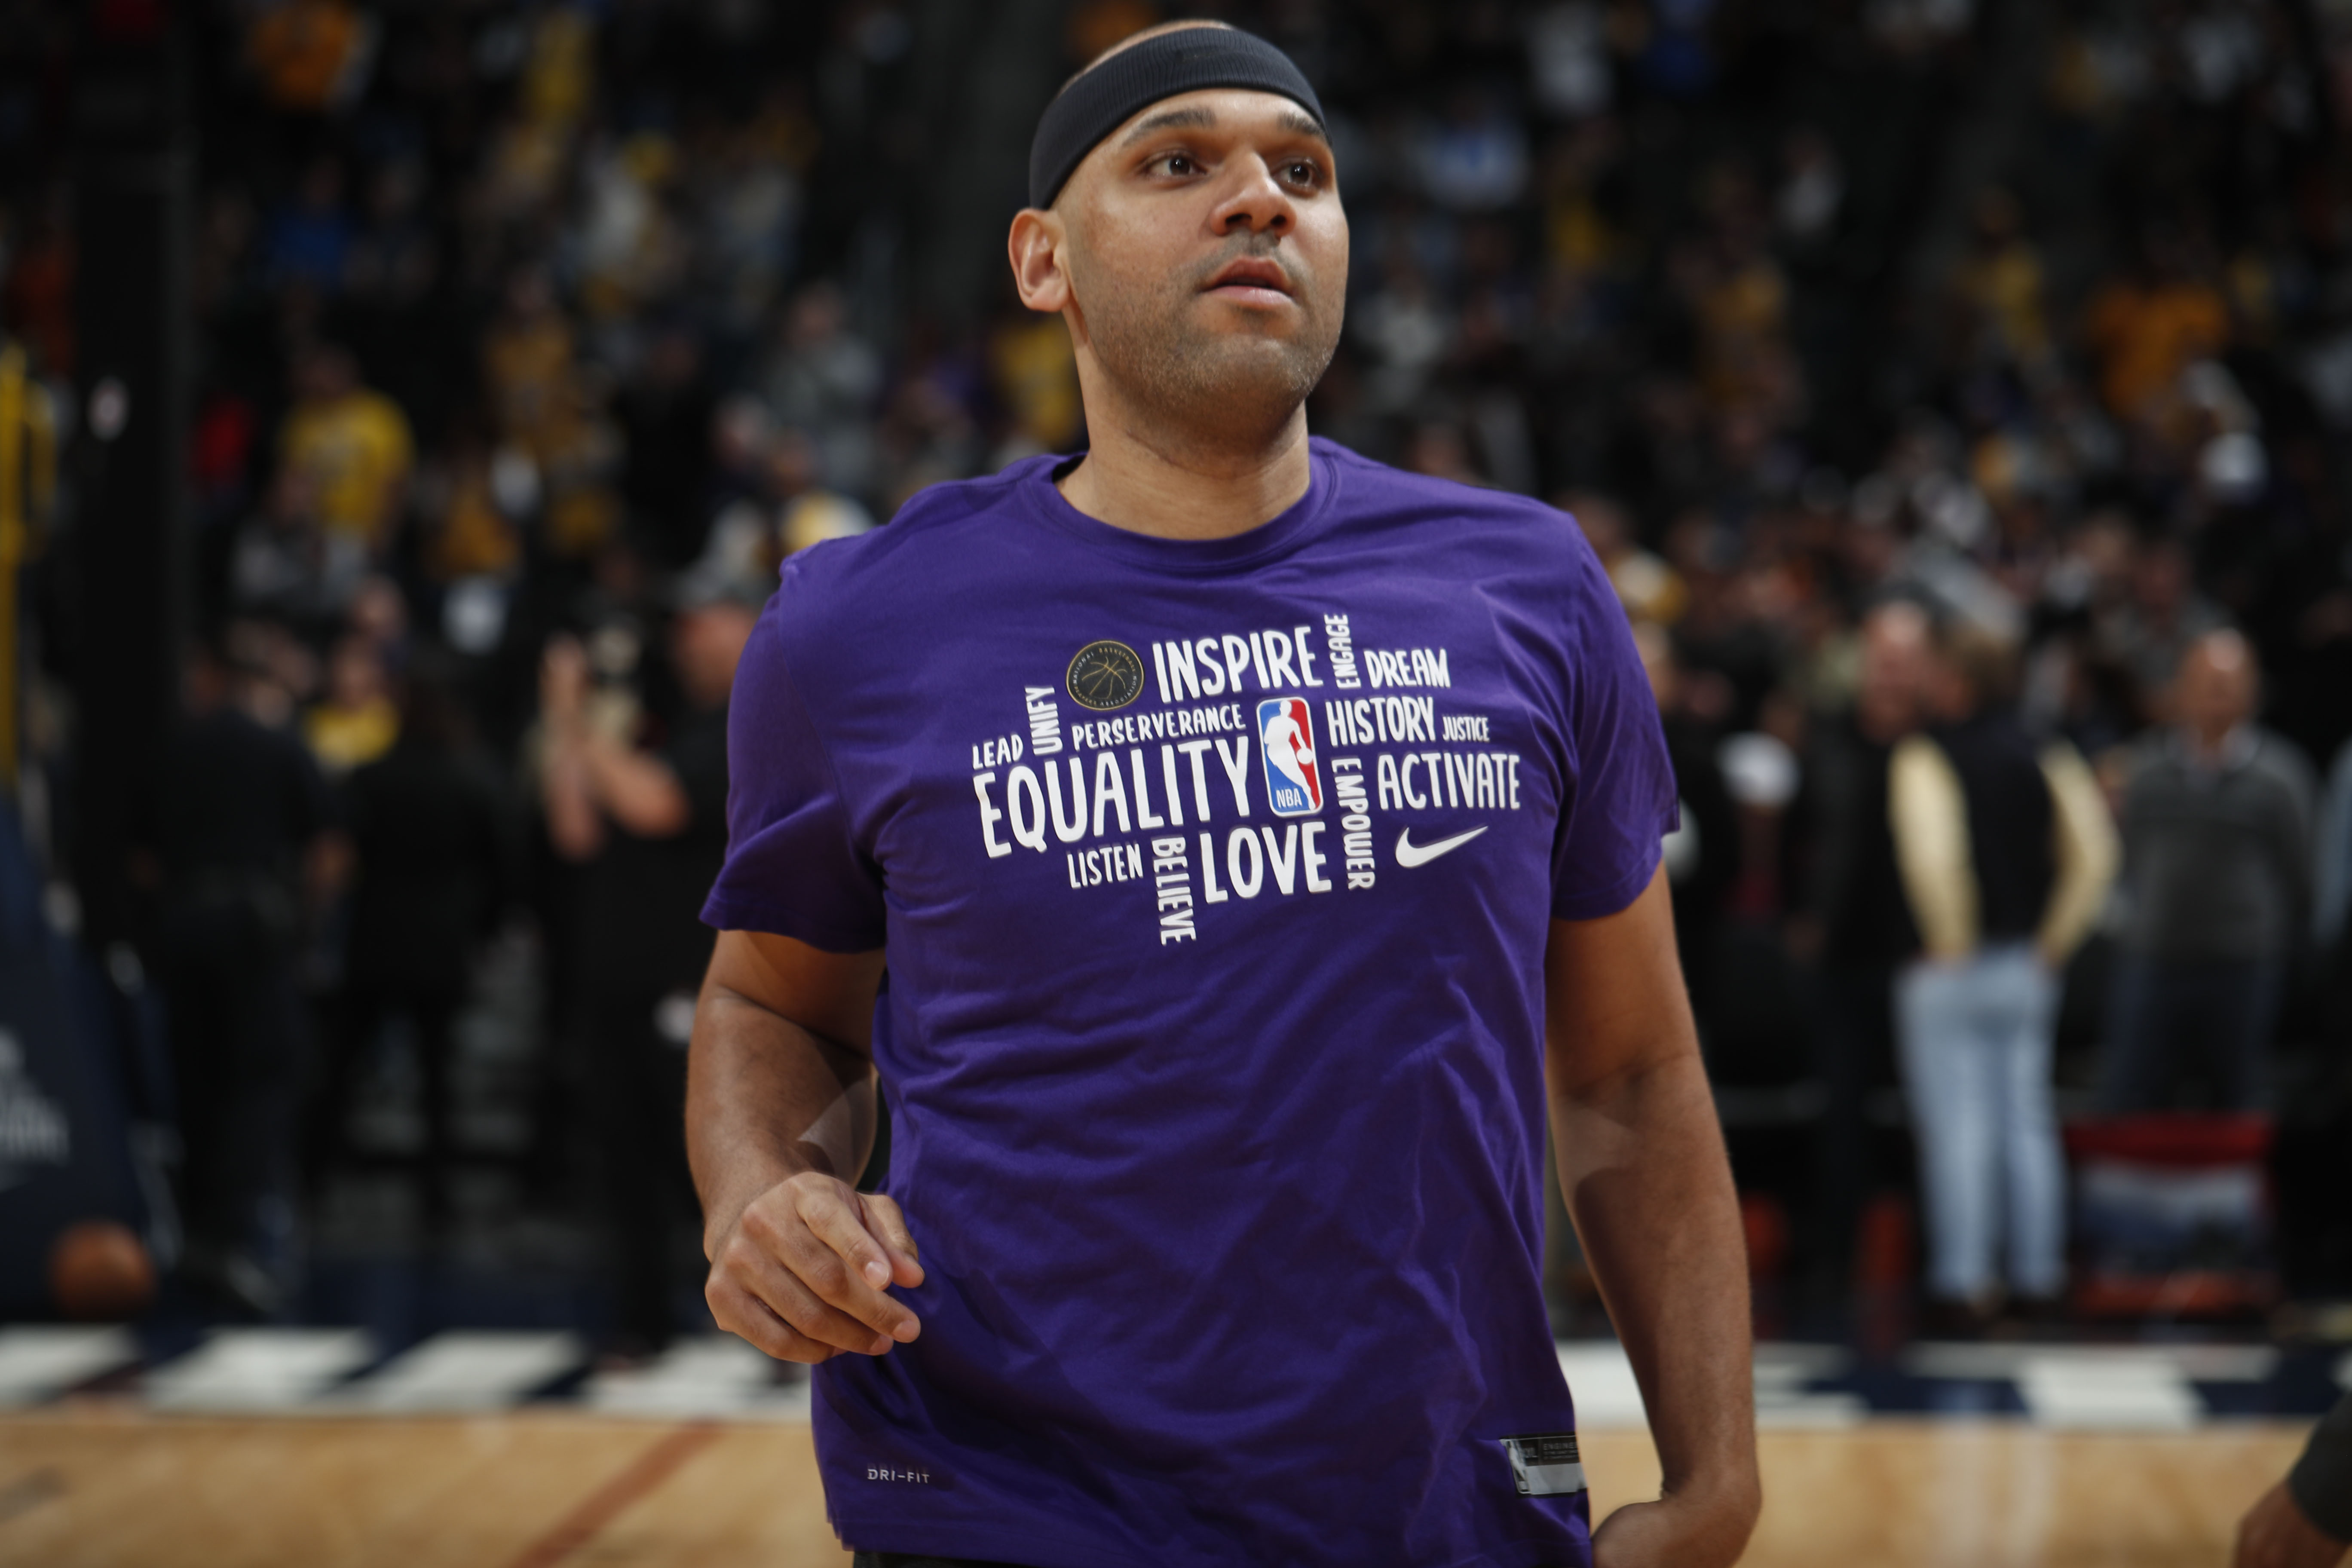 Phoenix Suns' Jared Dudley gives out free jerseys